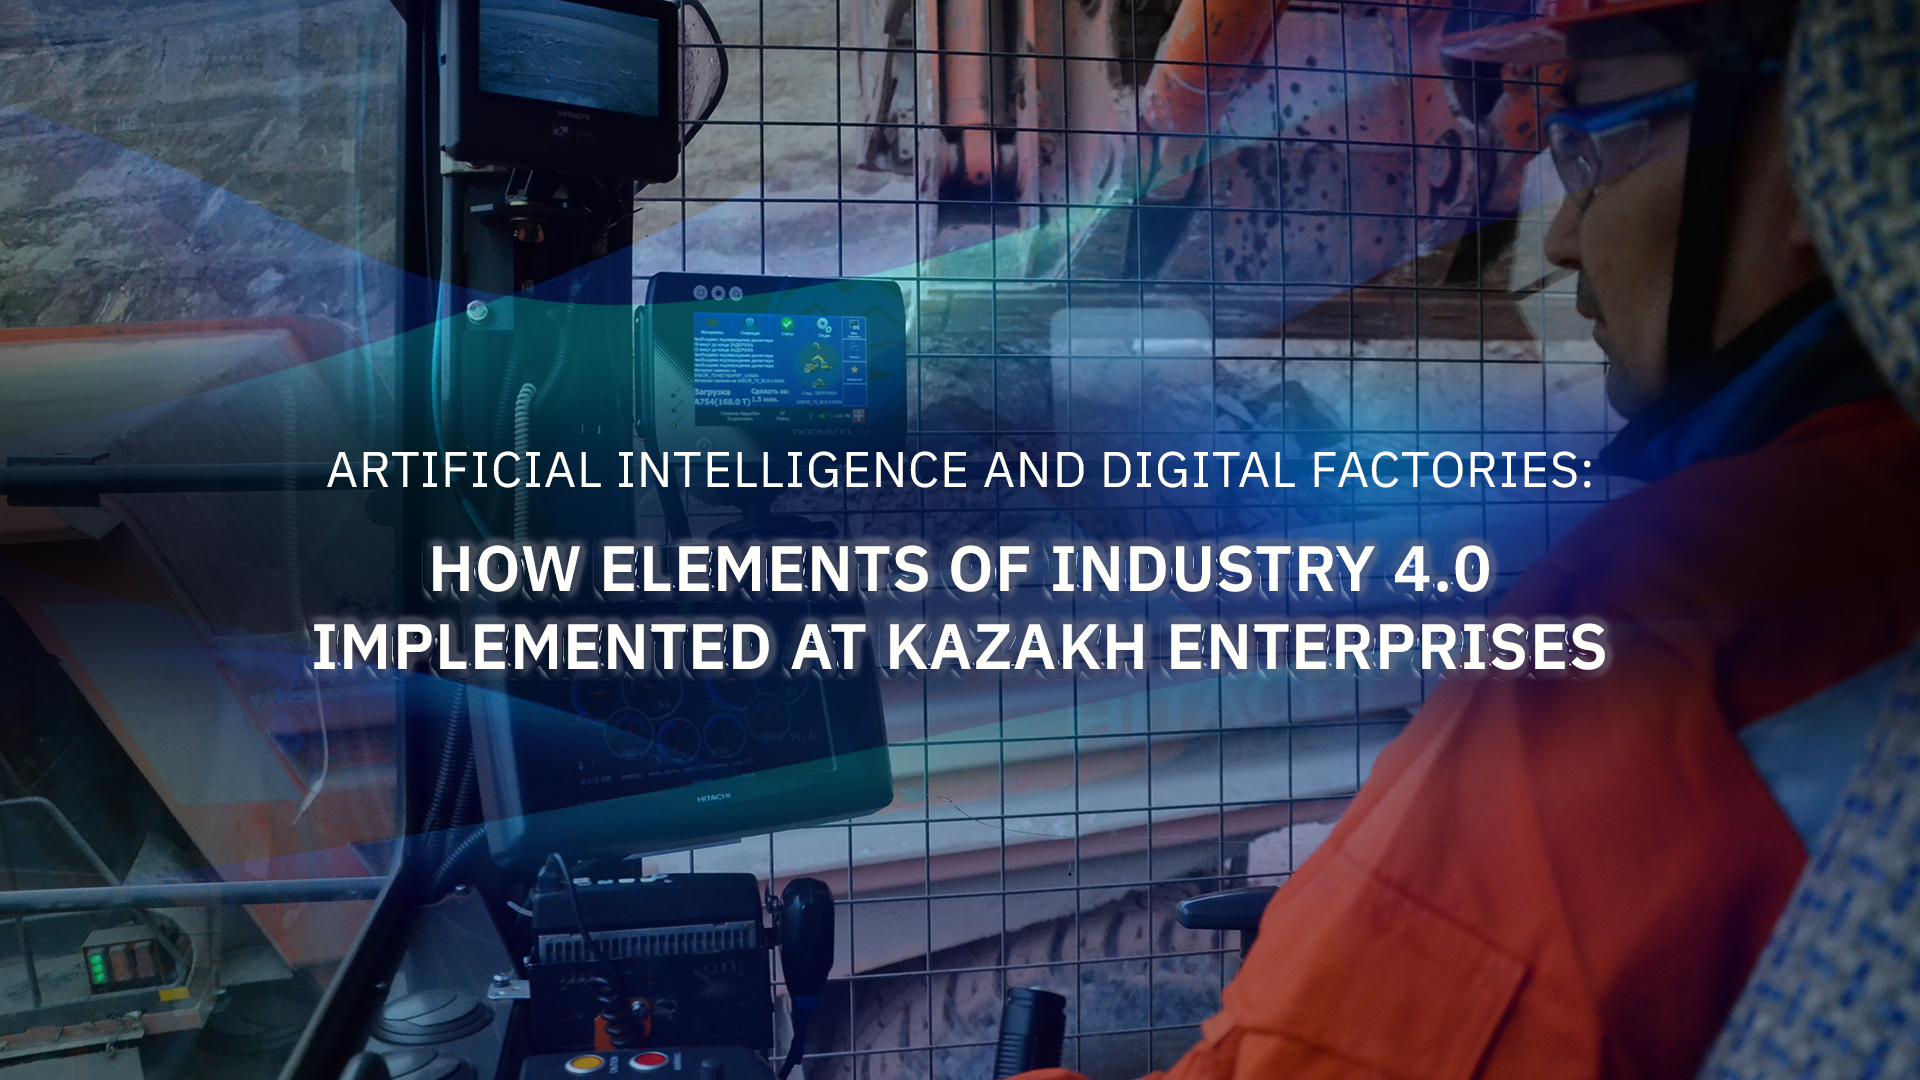 Artificial Intelligence and Digital Factories: How Industry 4.0 Elements Implemented at Enterprises in Kazakhstan